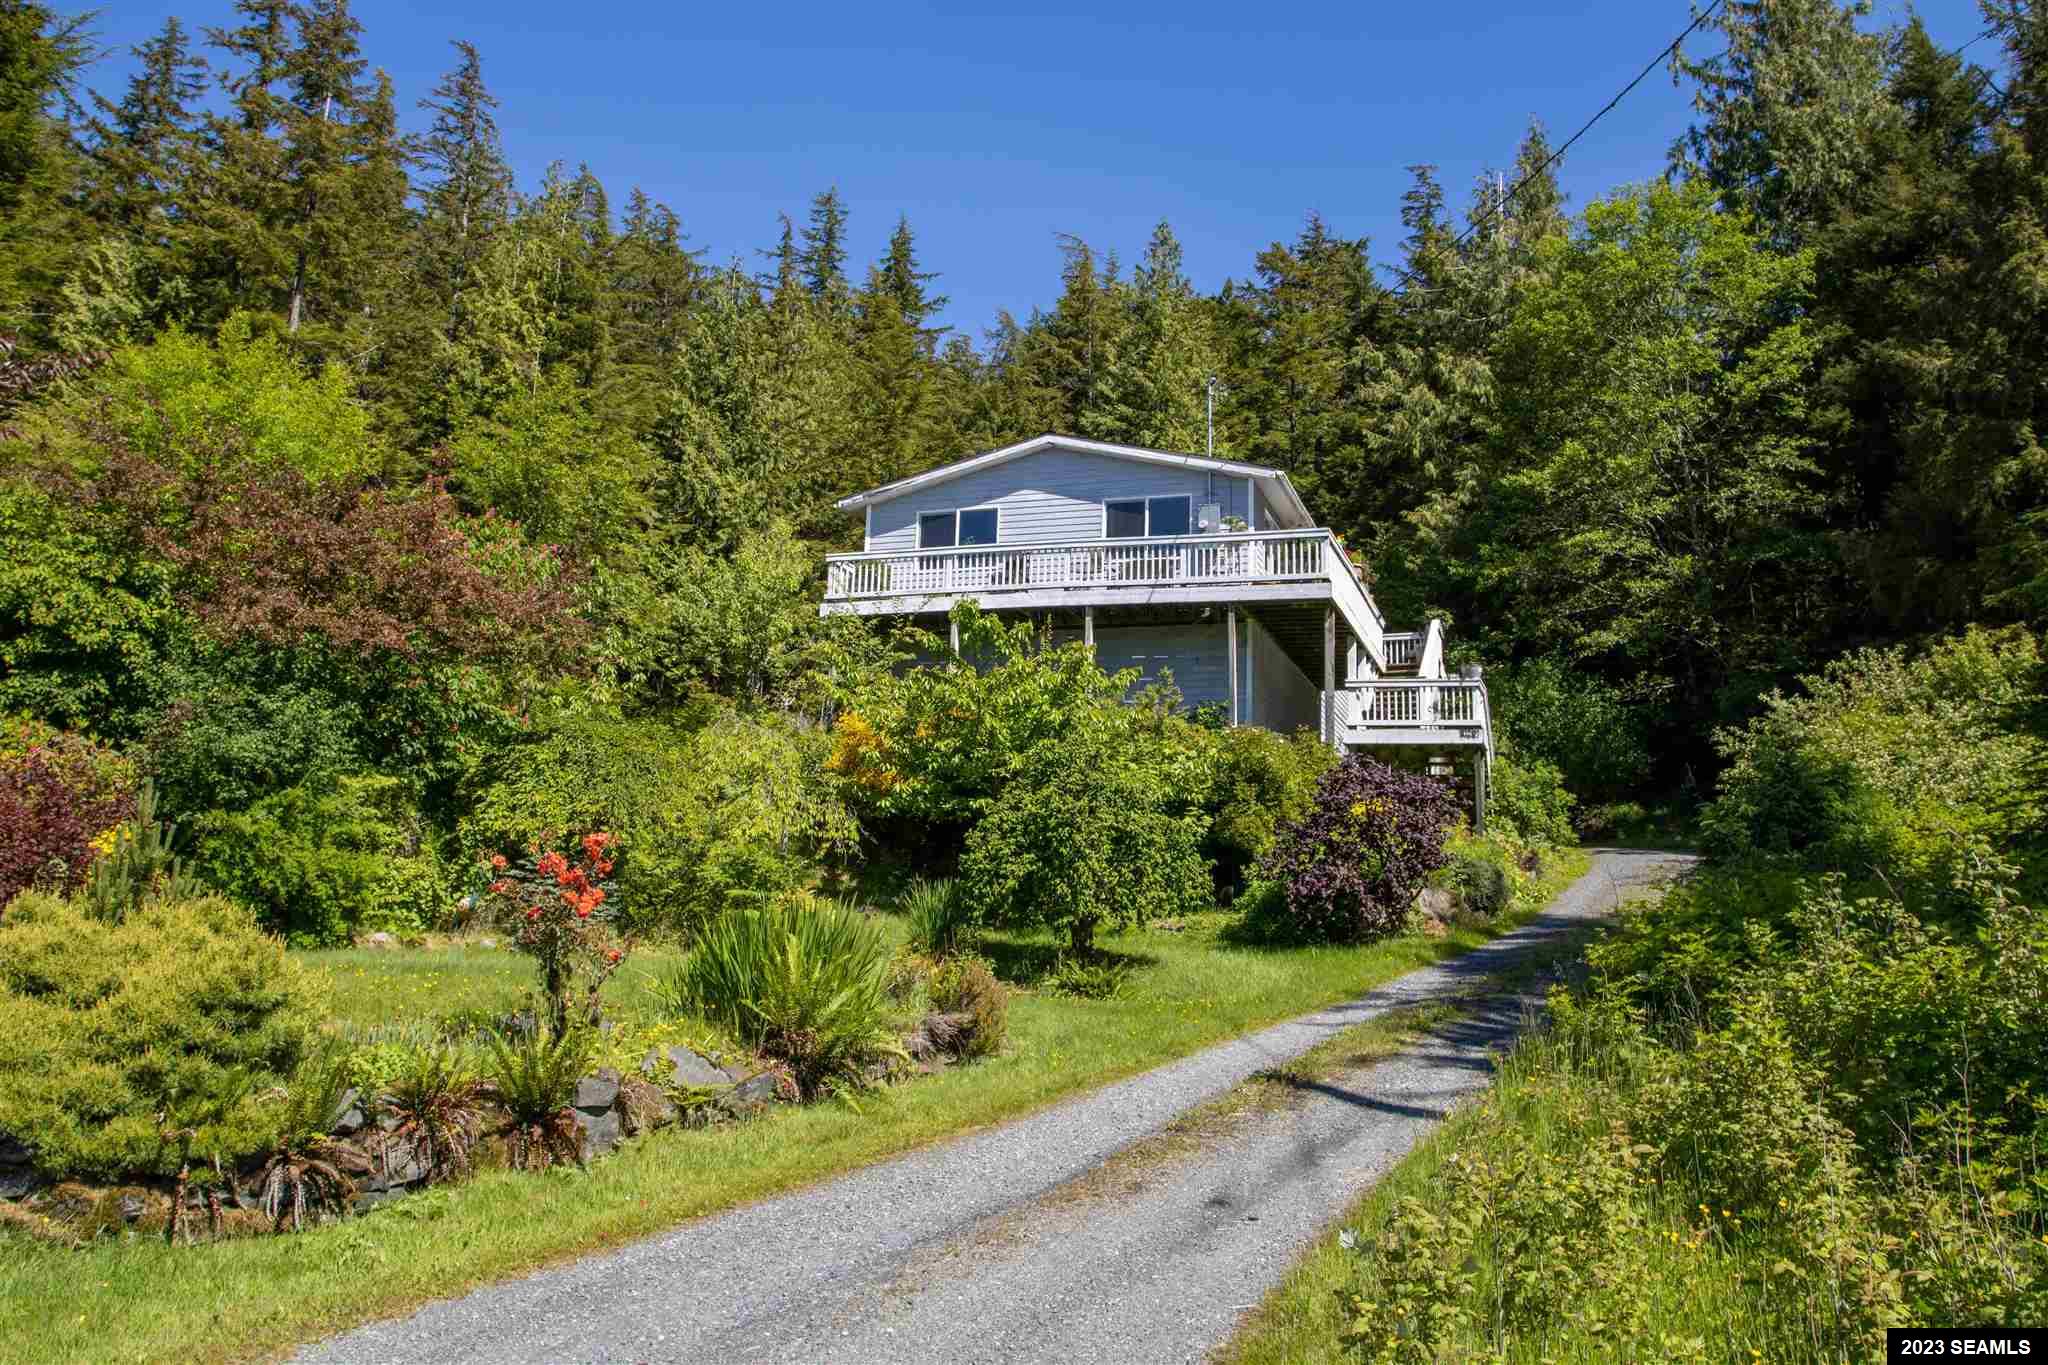 8120 Tongass Hwy., Ketchikan, AK 99901, 3 Bedrooms Bedrooms, ,2 BathroomsBathrooms,Residential,For Sale,Tongass Hwy.,23161